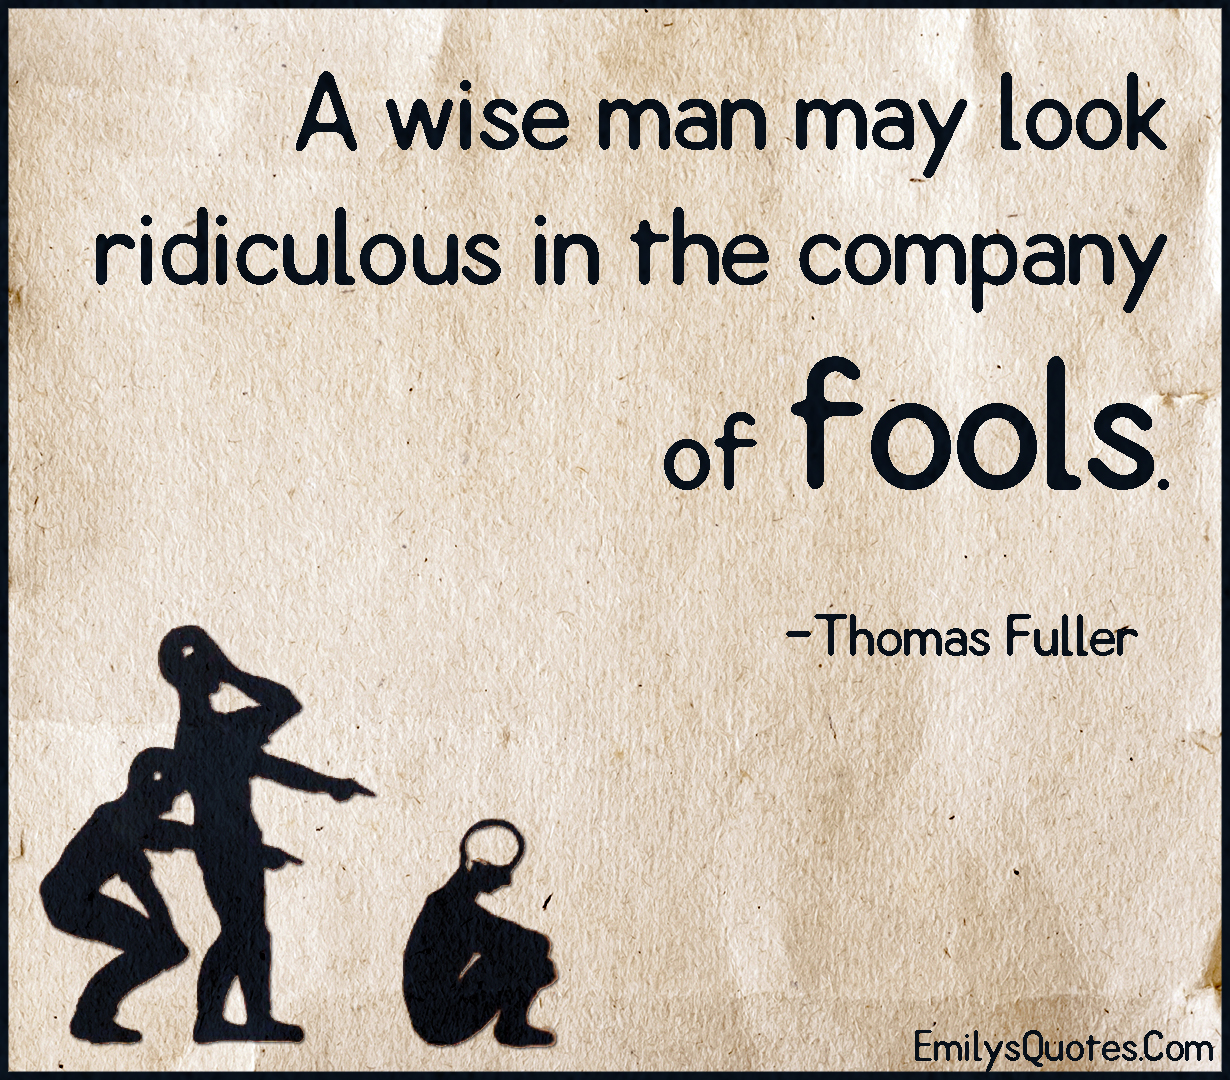 A wise man may look ridiculous in the company of fools